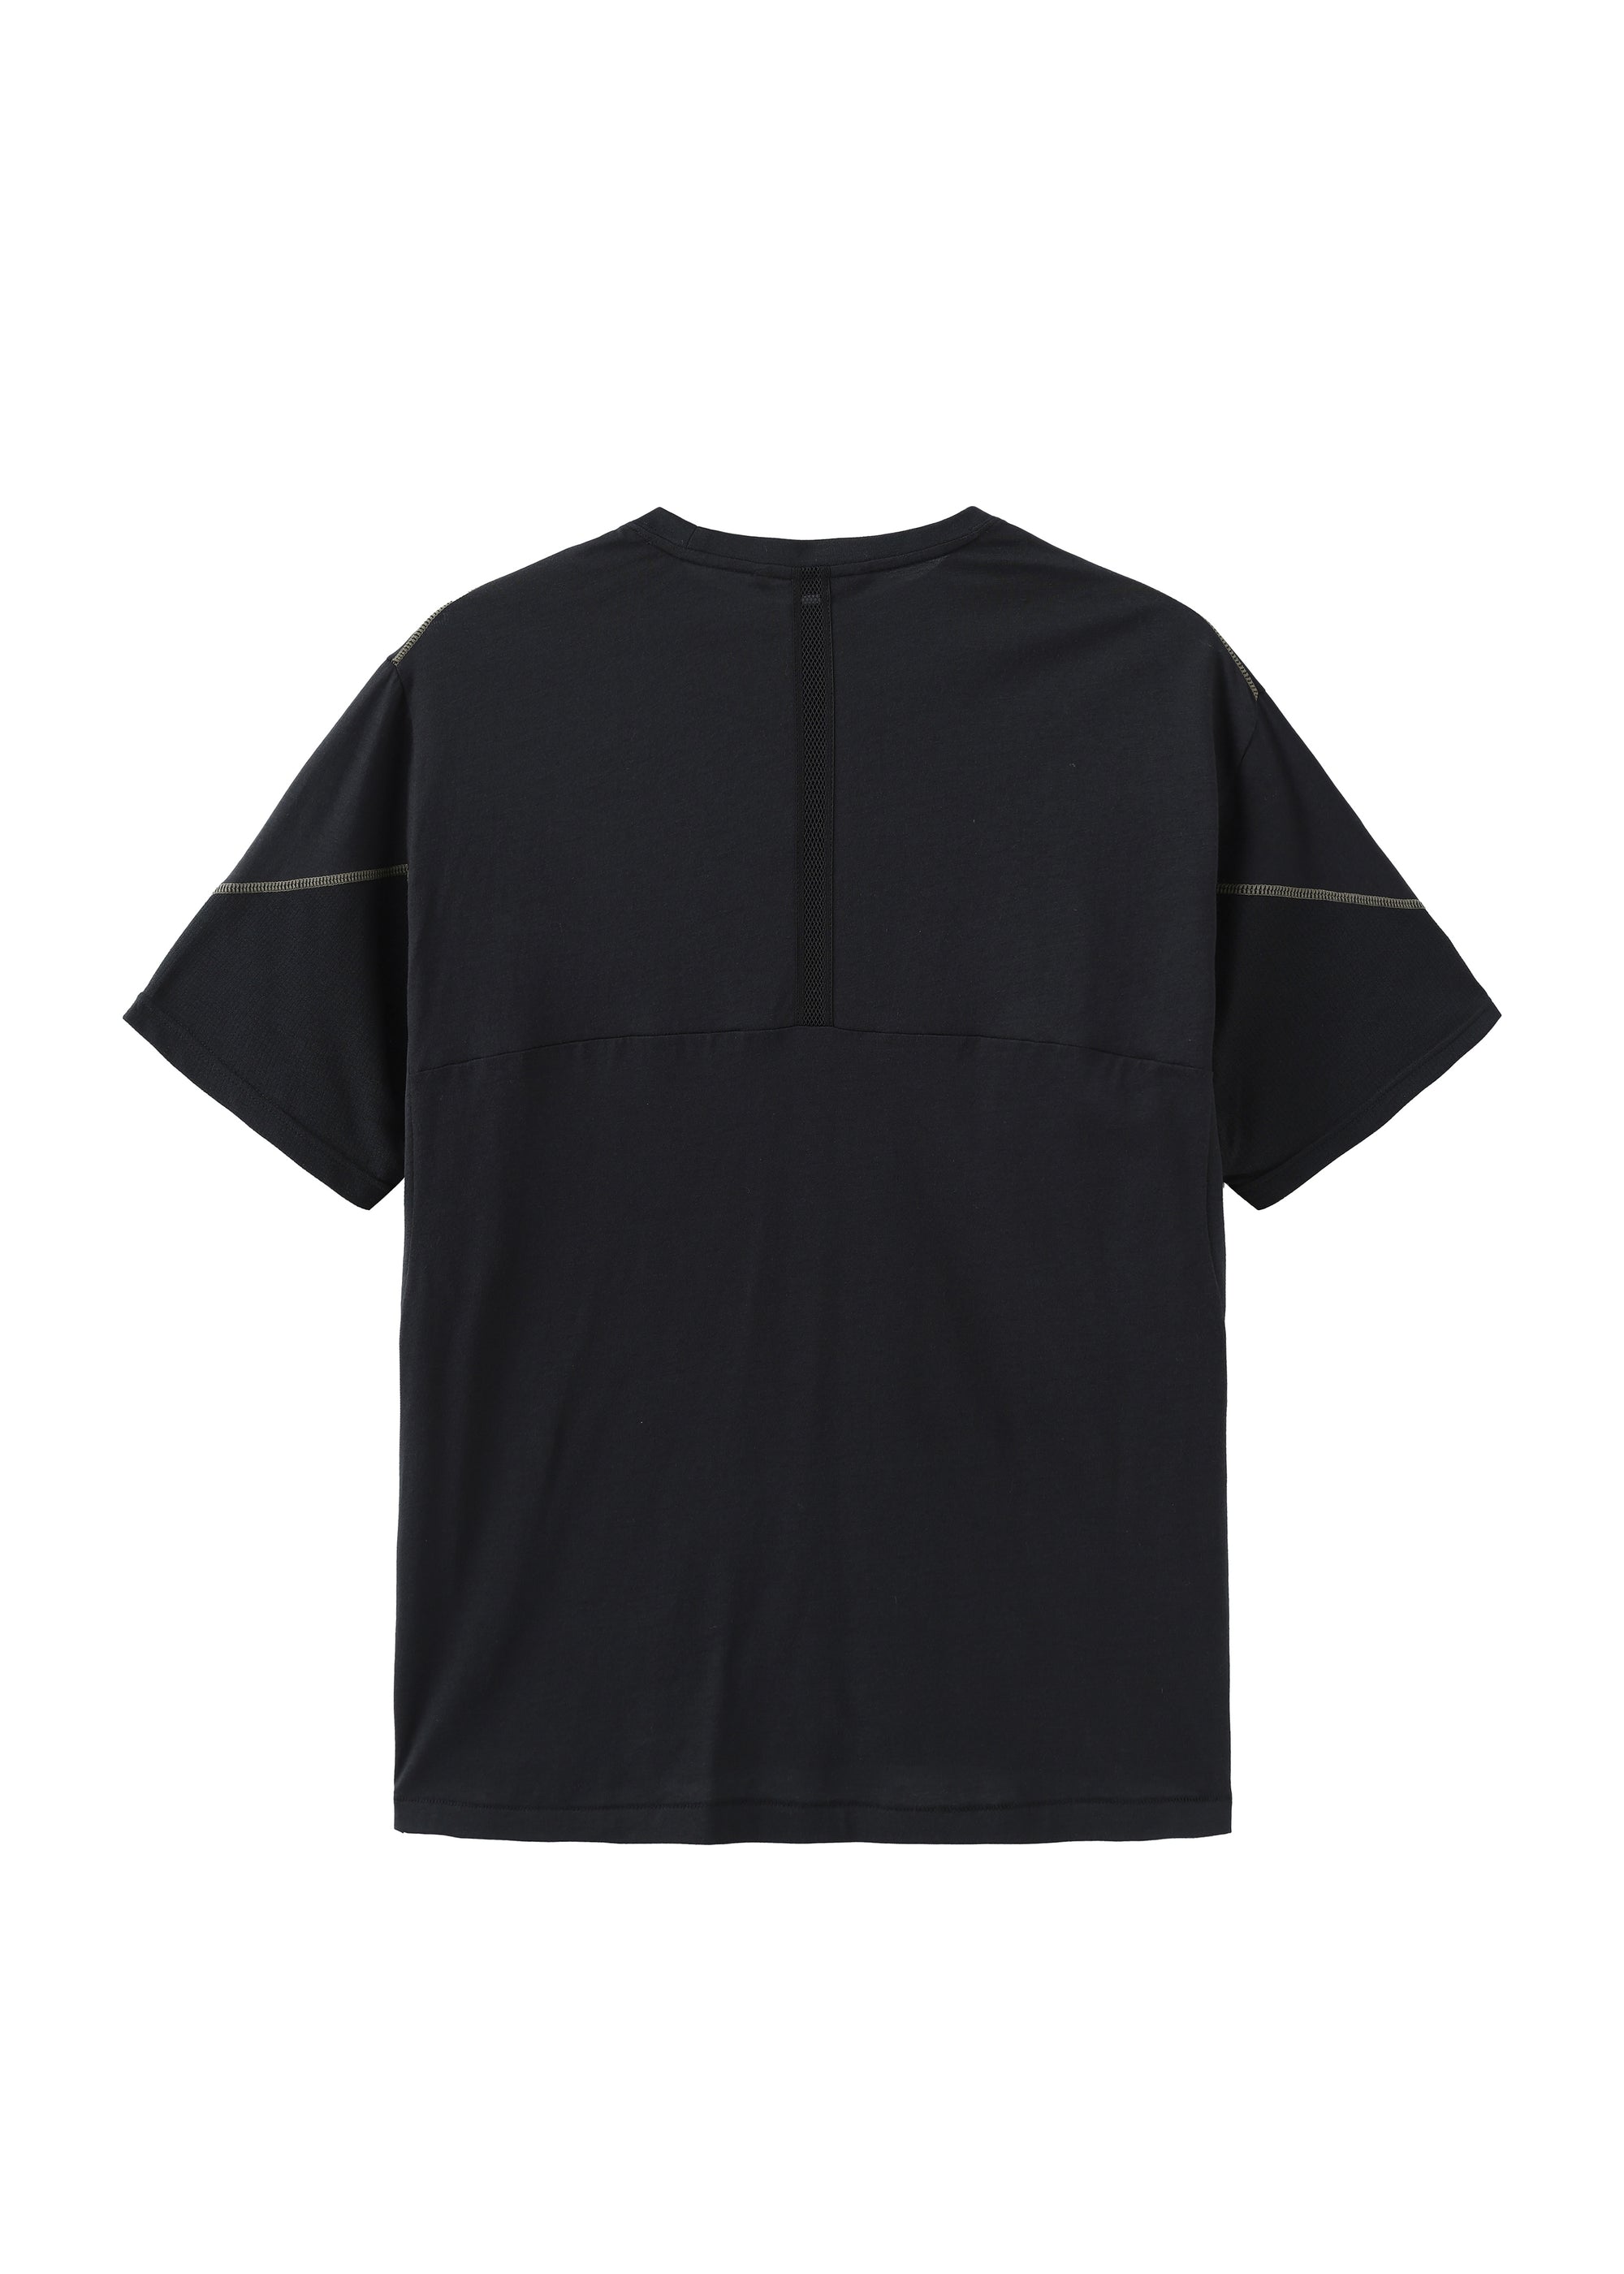 Top stitched Panel T-Shirt with zip pockets